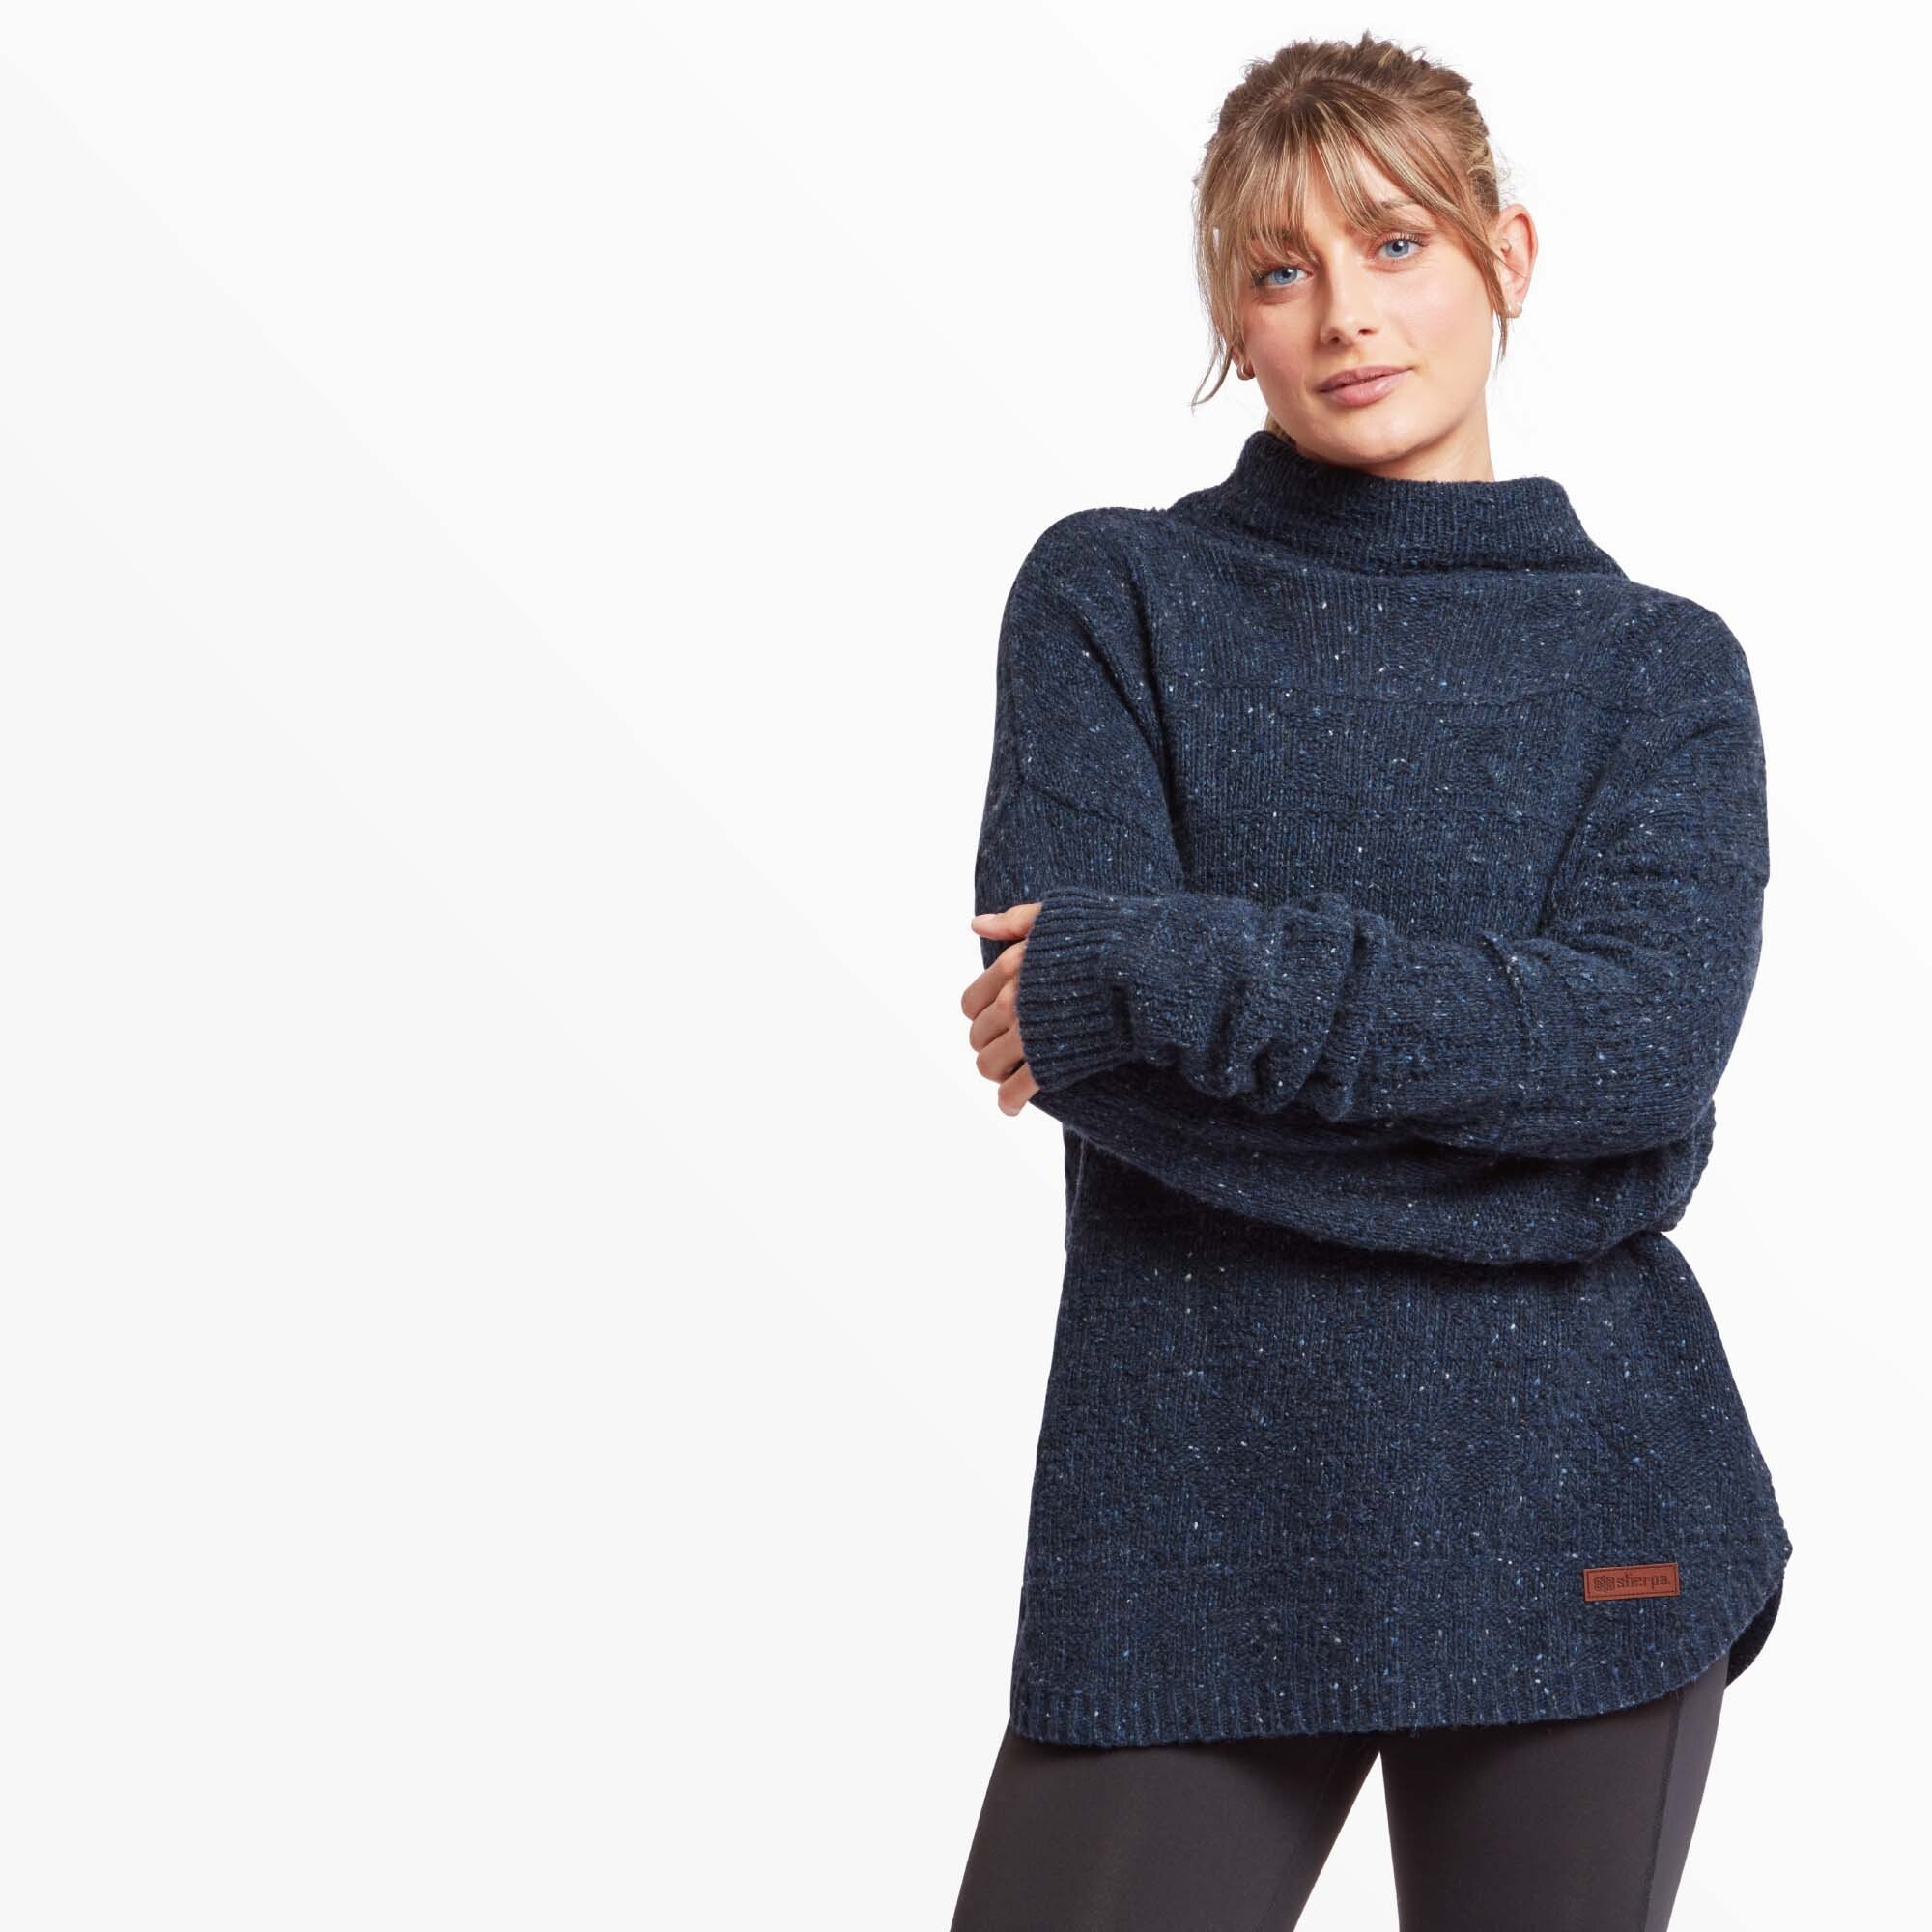 Yuden Pullover Sweater| Ethical & Sustainable Clothing | Sherpa